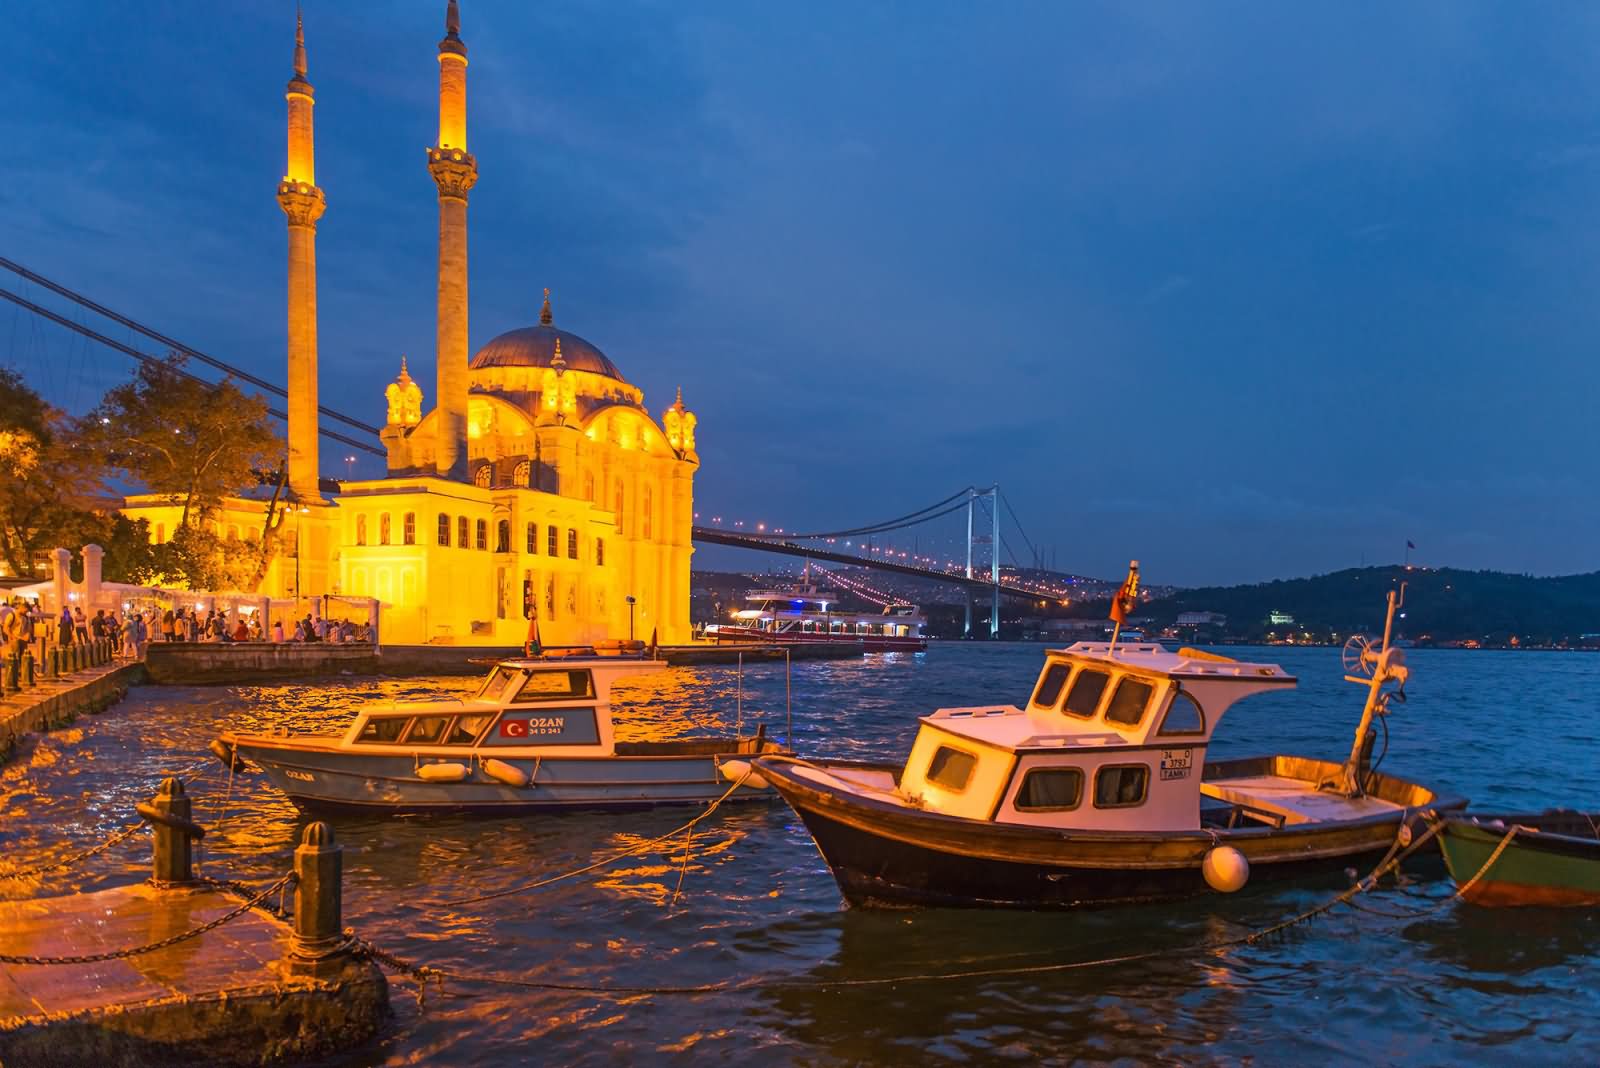 Ferries Park Near The Ortakoy Mosque At Night